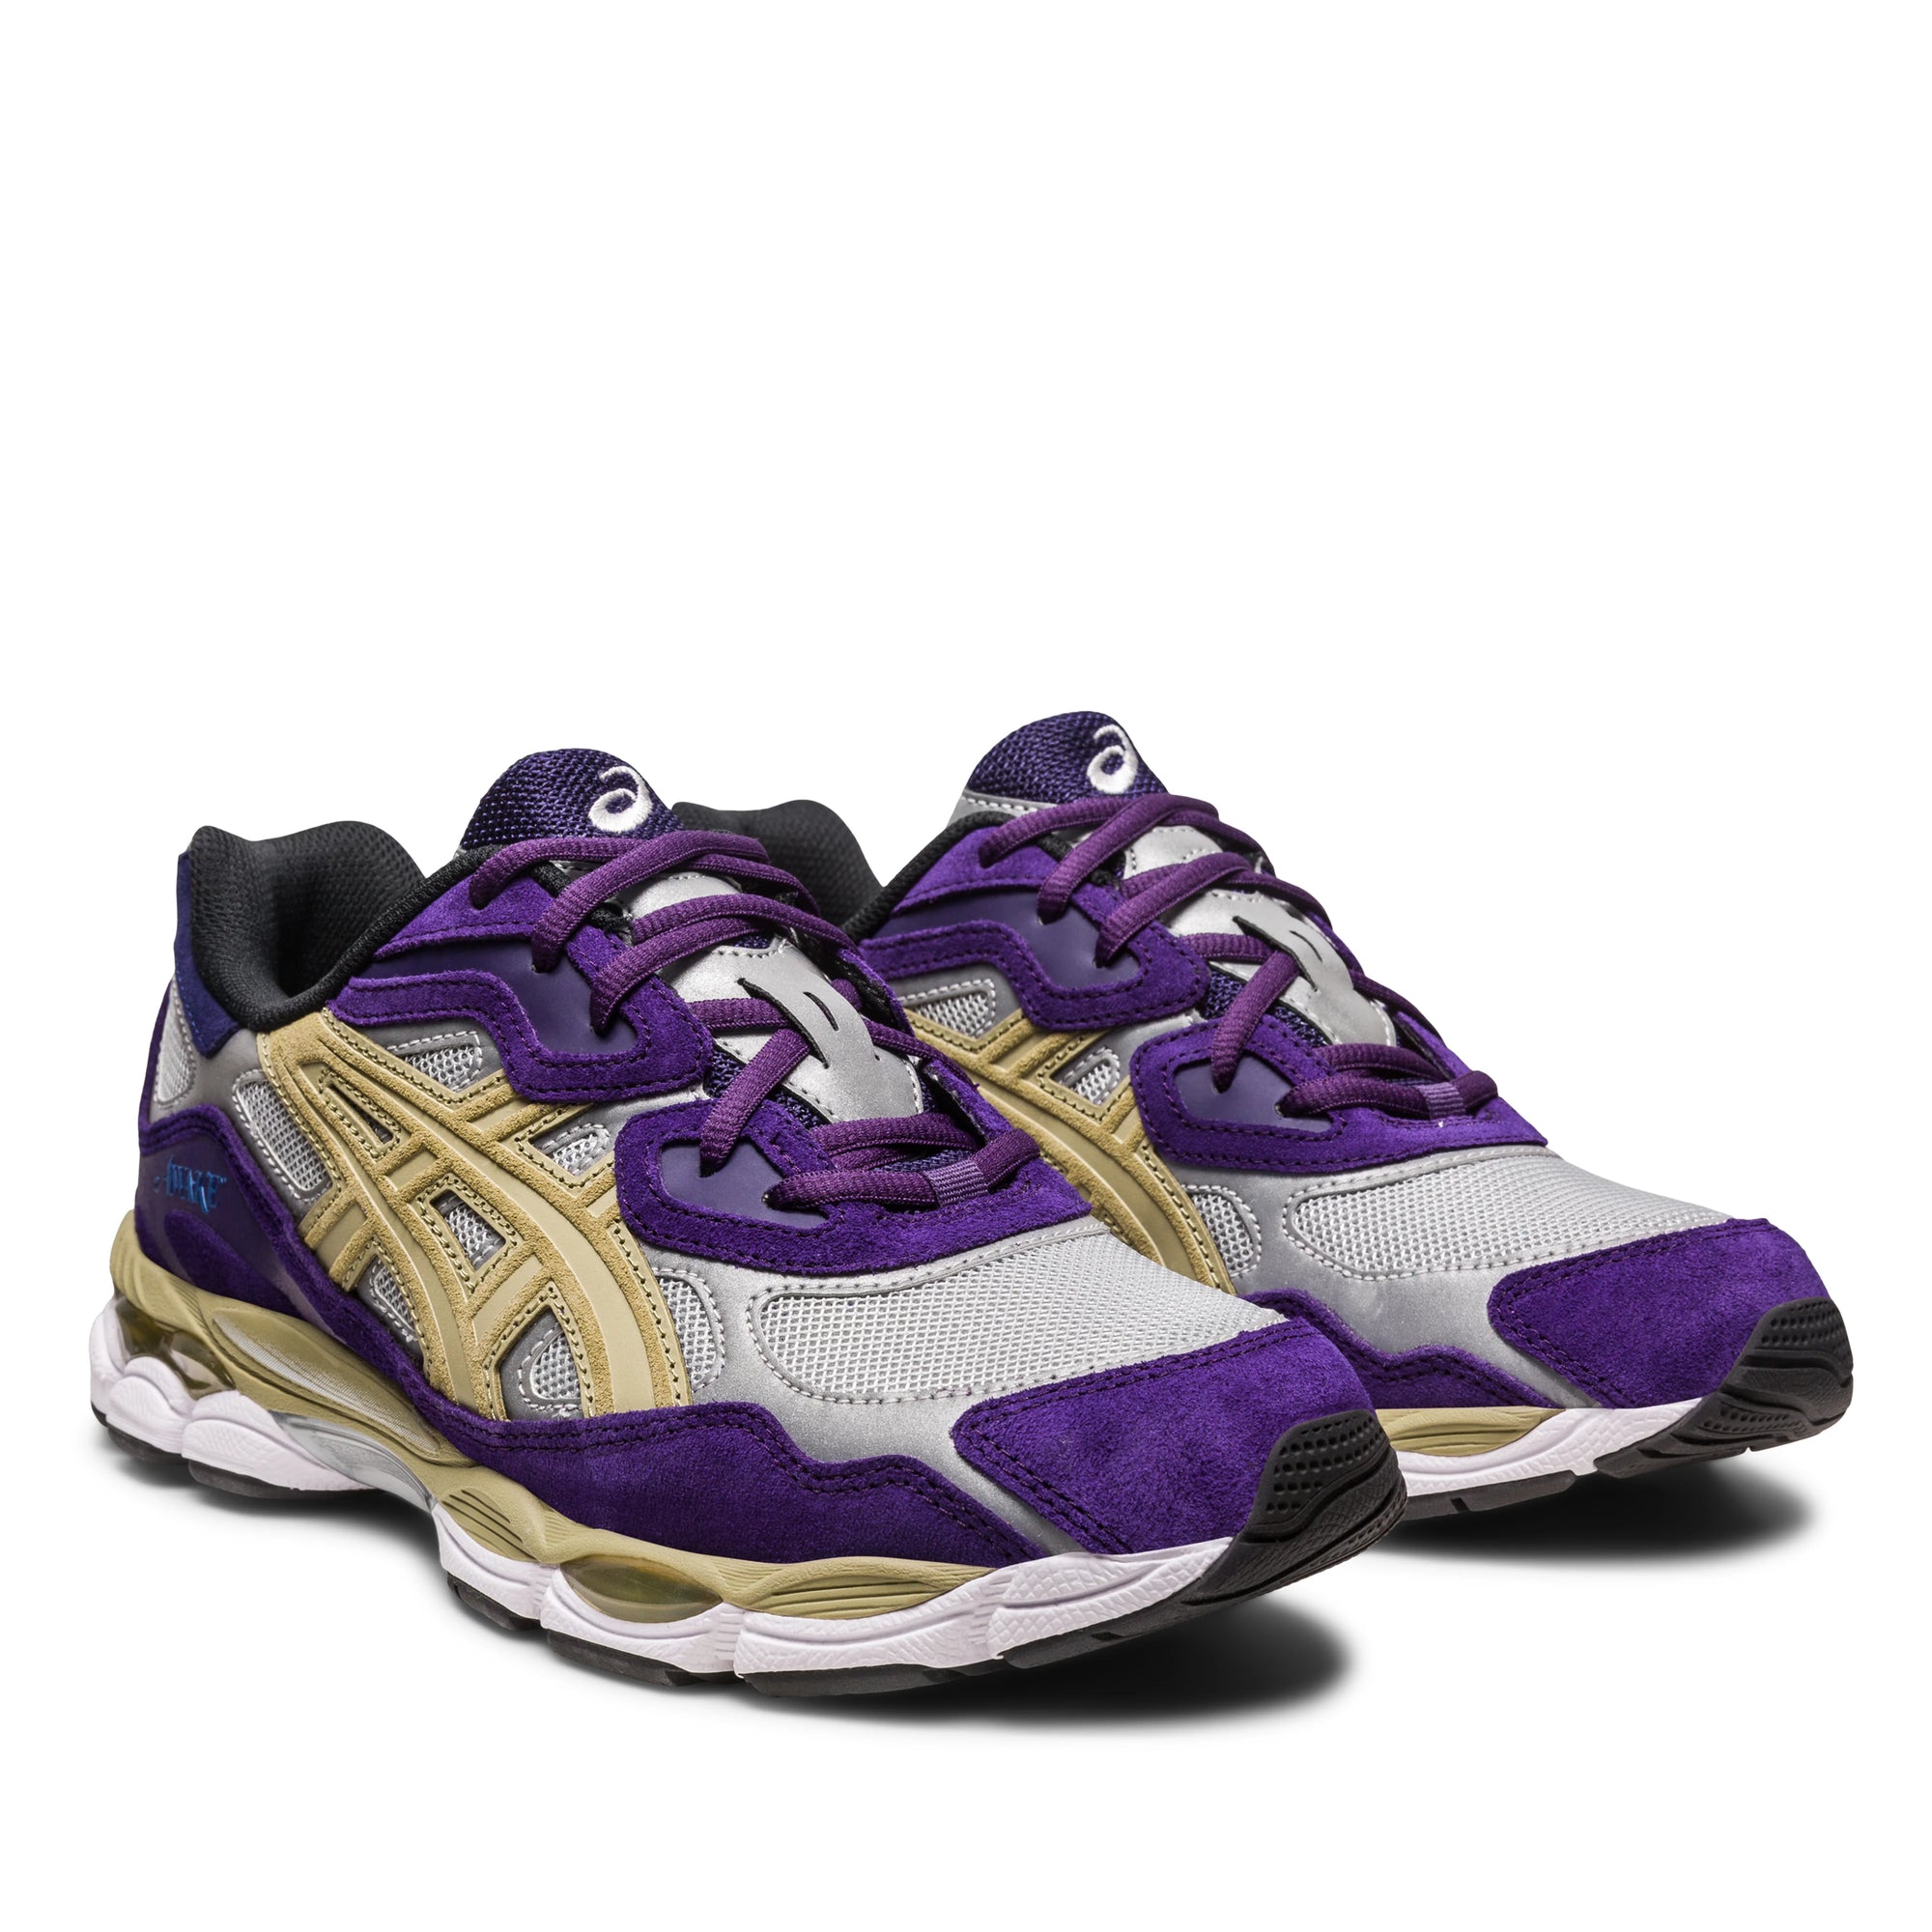 ASICS - GEL-NYC - (Pure Silver/Gothic Grape) view 3